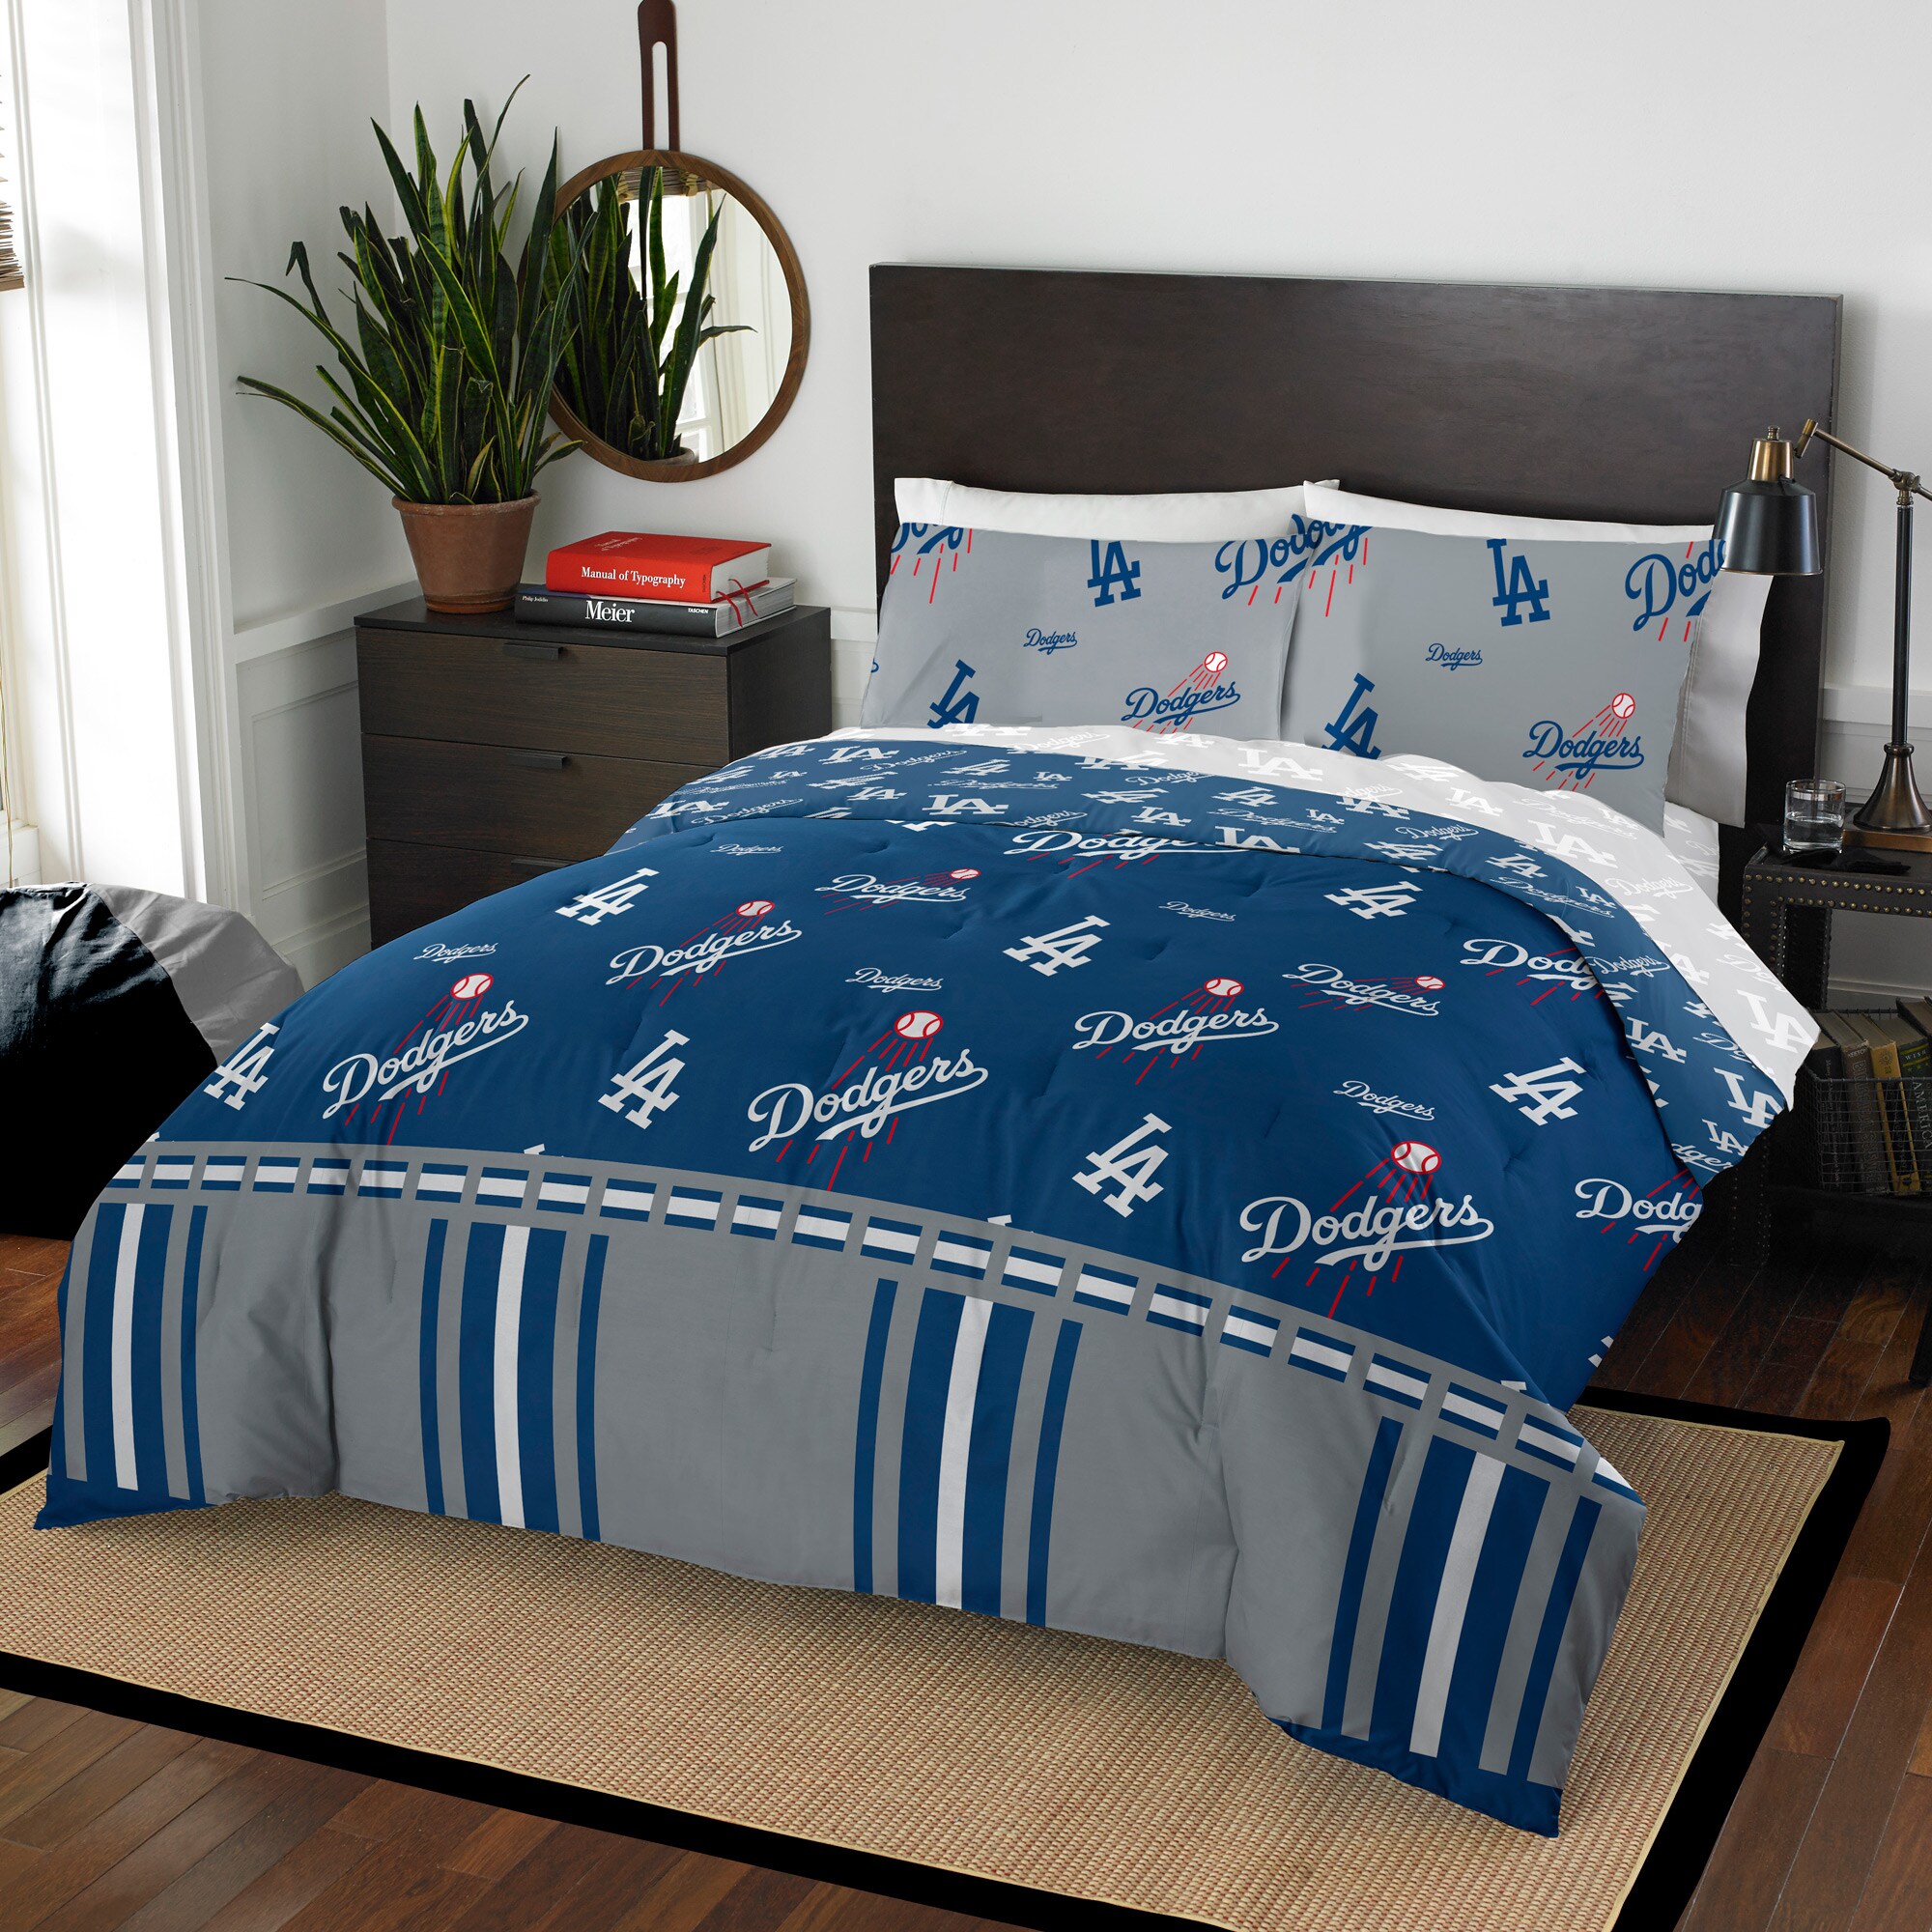 MLB Los Angeles Dodgers Bed In Bag Set, Queen Size, Team Colors, 100% Polyester, 5 Piece Set - image 1 of 4